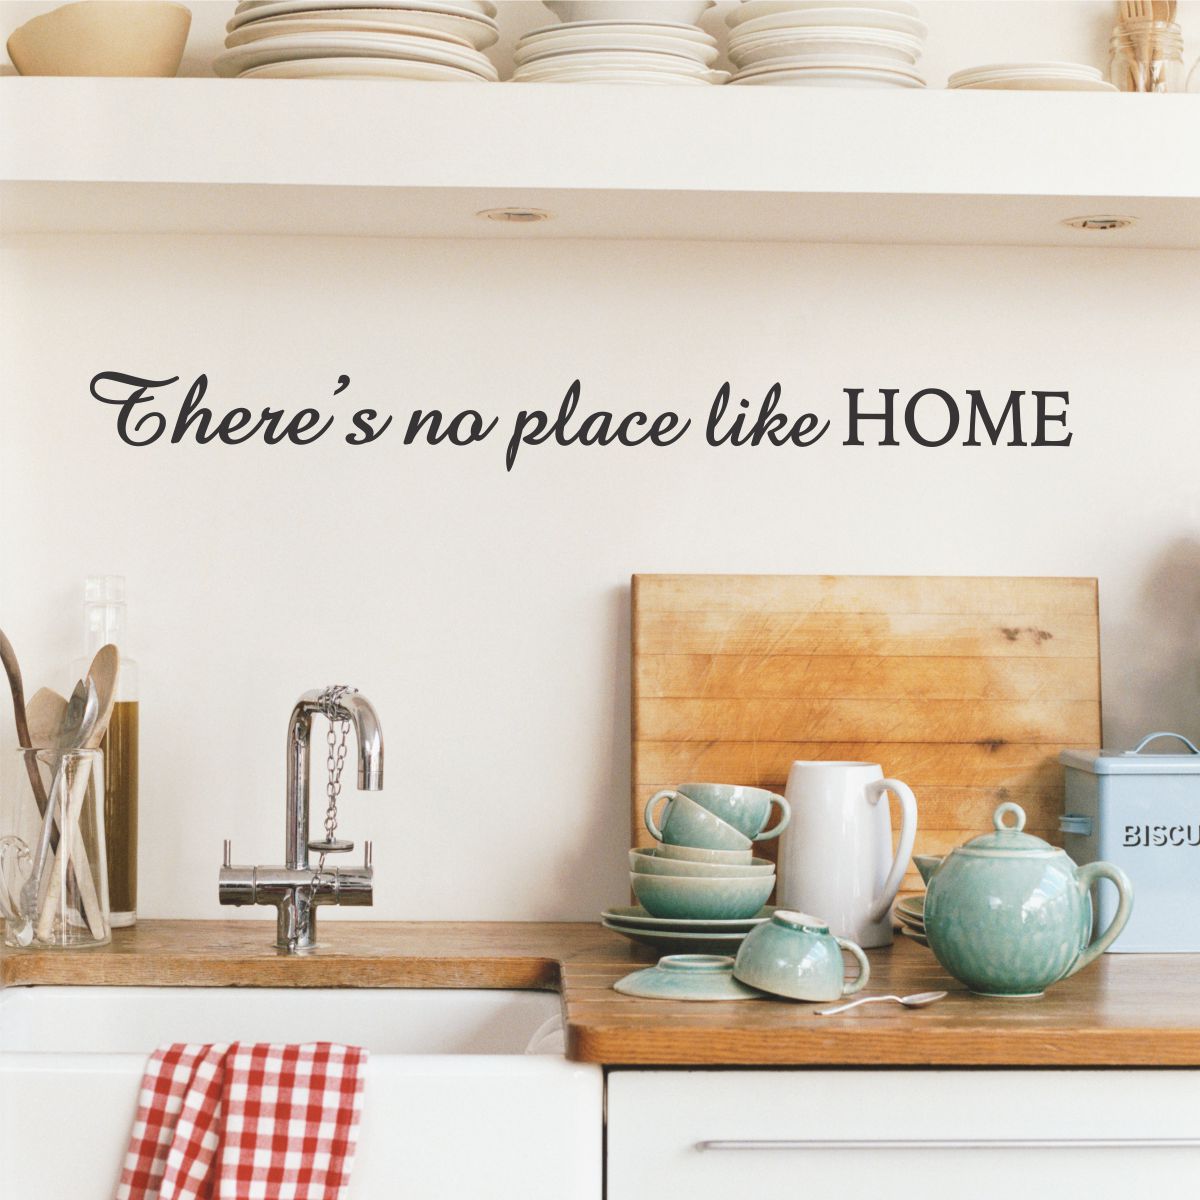 Design with Vinyl Be It Ever So Humble Theres No Place Like Home Quote Picture Art Brown Brown Peel & Stick Vinyl Wall Decal Sticker Size 8x20 Color 